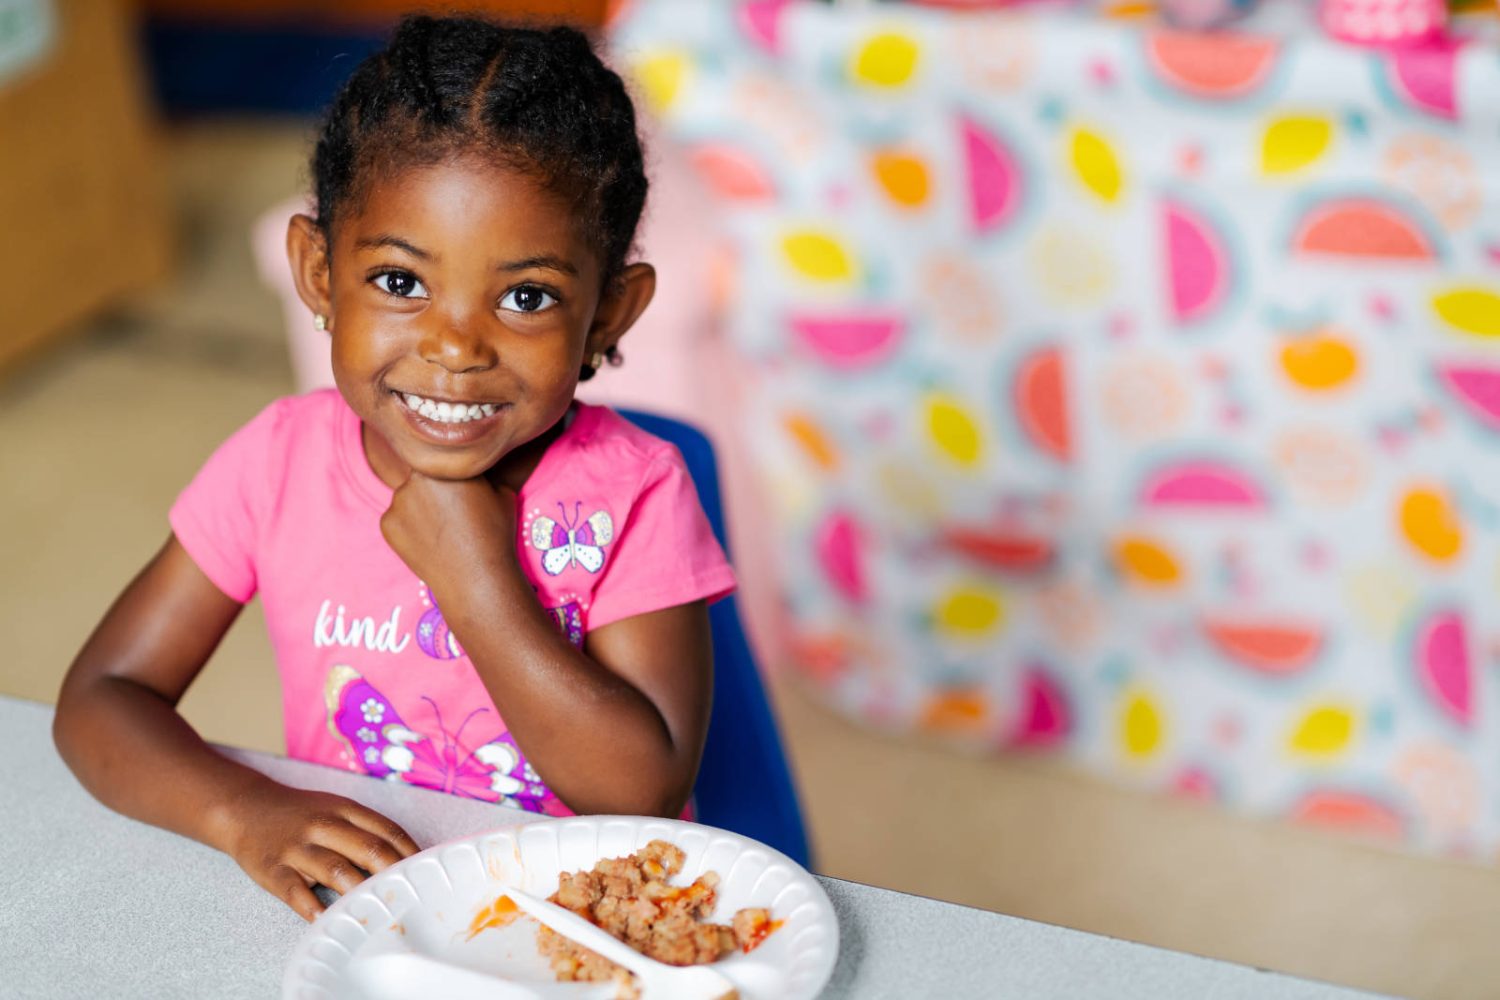 A young girl with a plate of food smiles at the camera